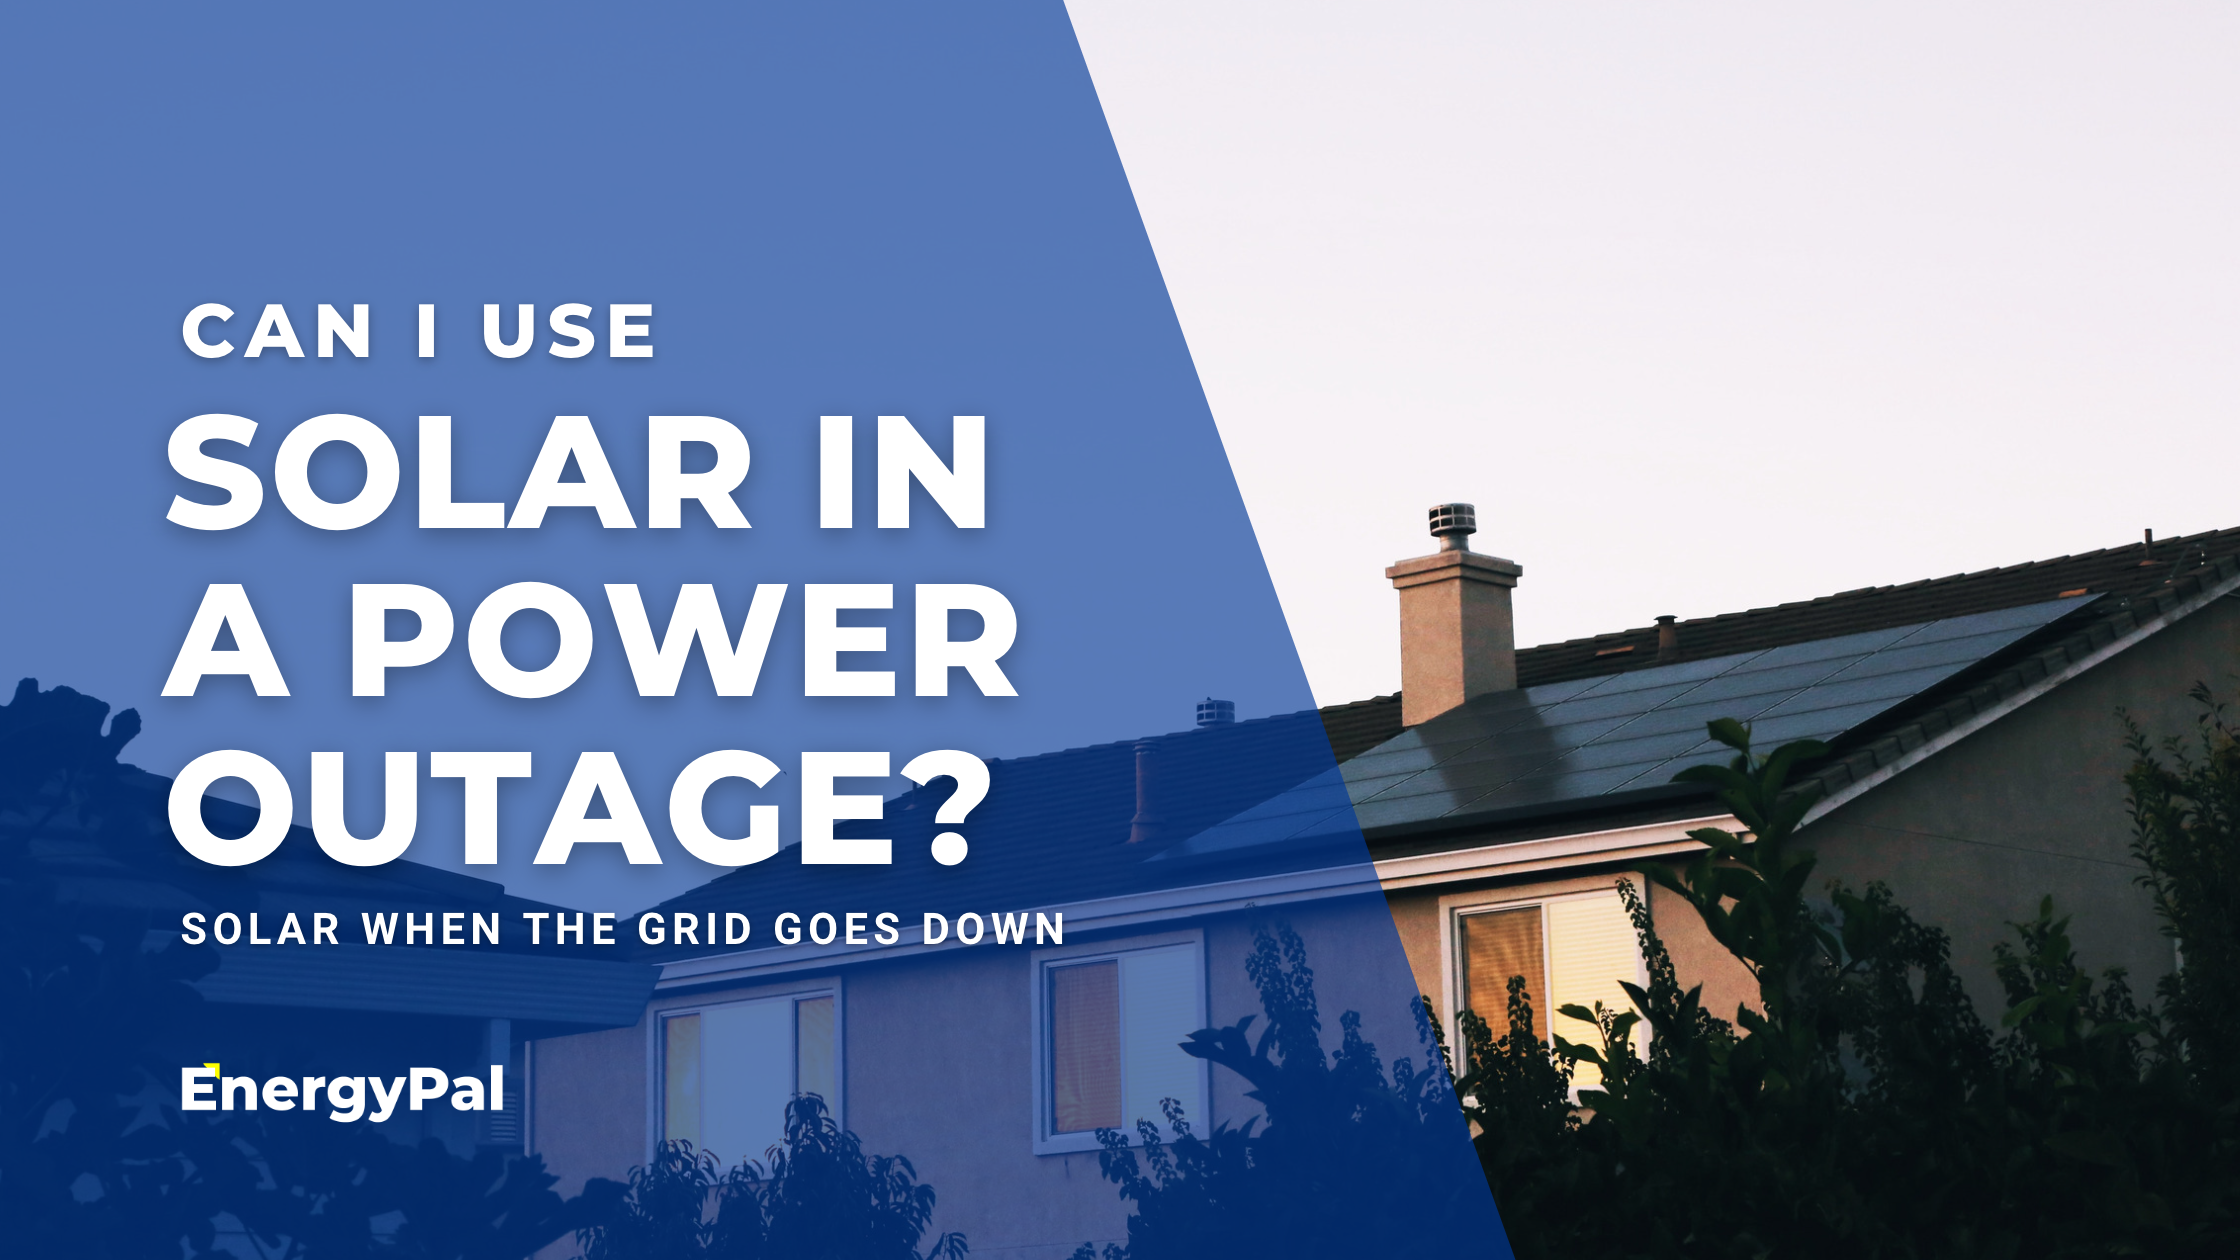 Can I use solar energy during a power outage?